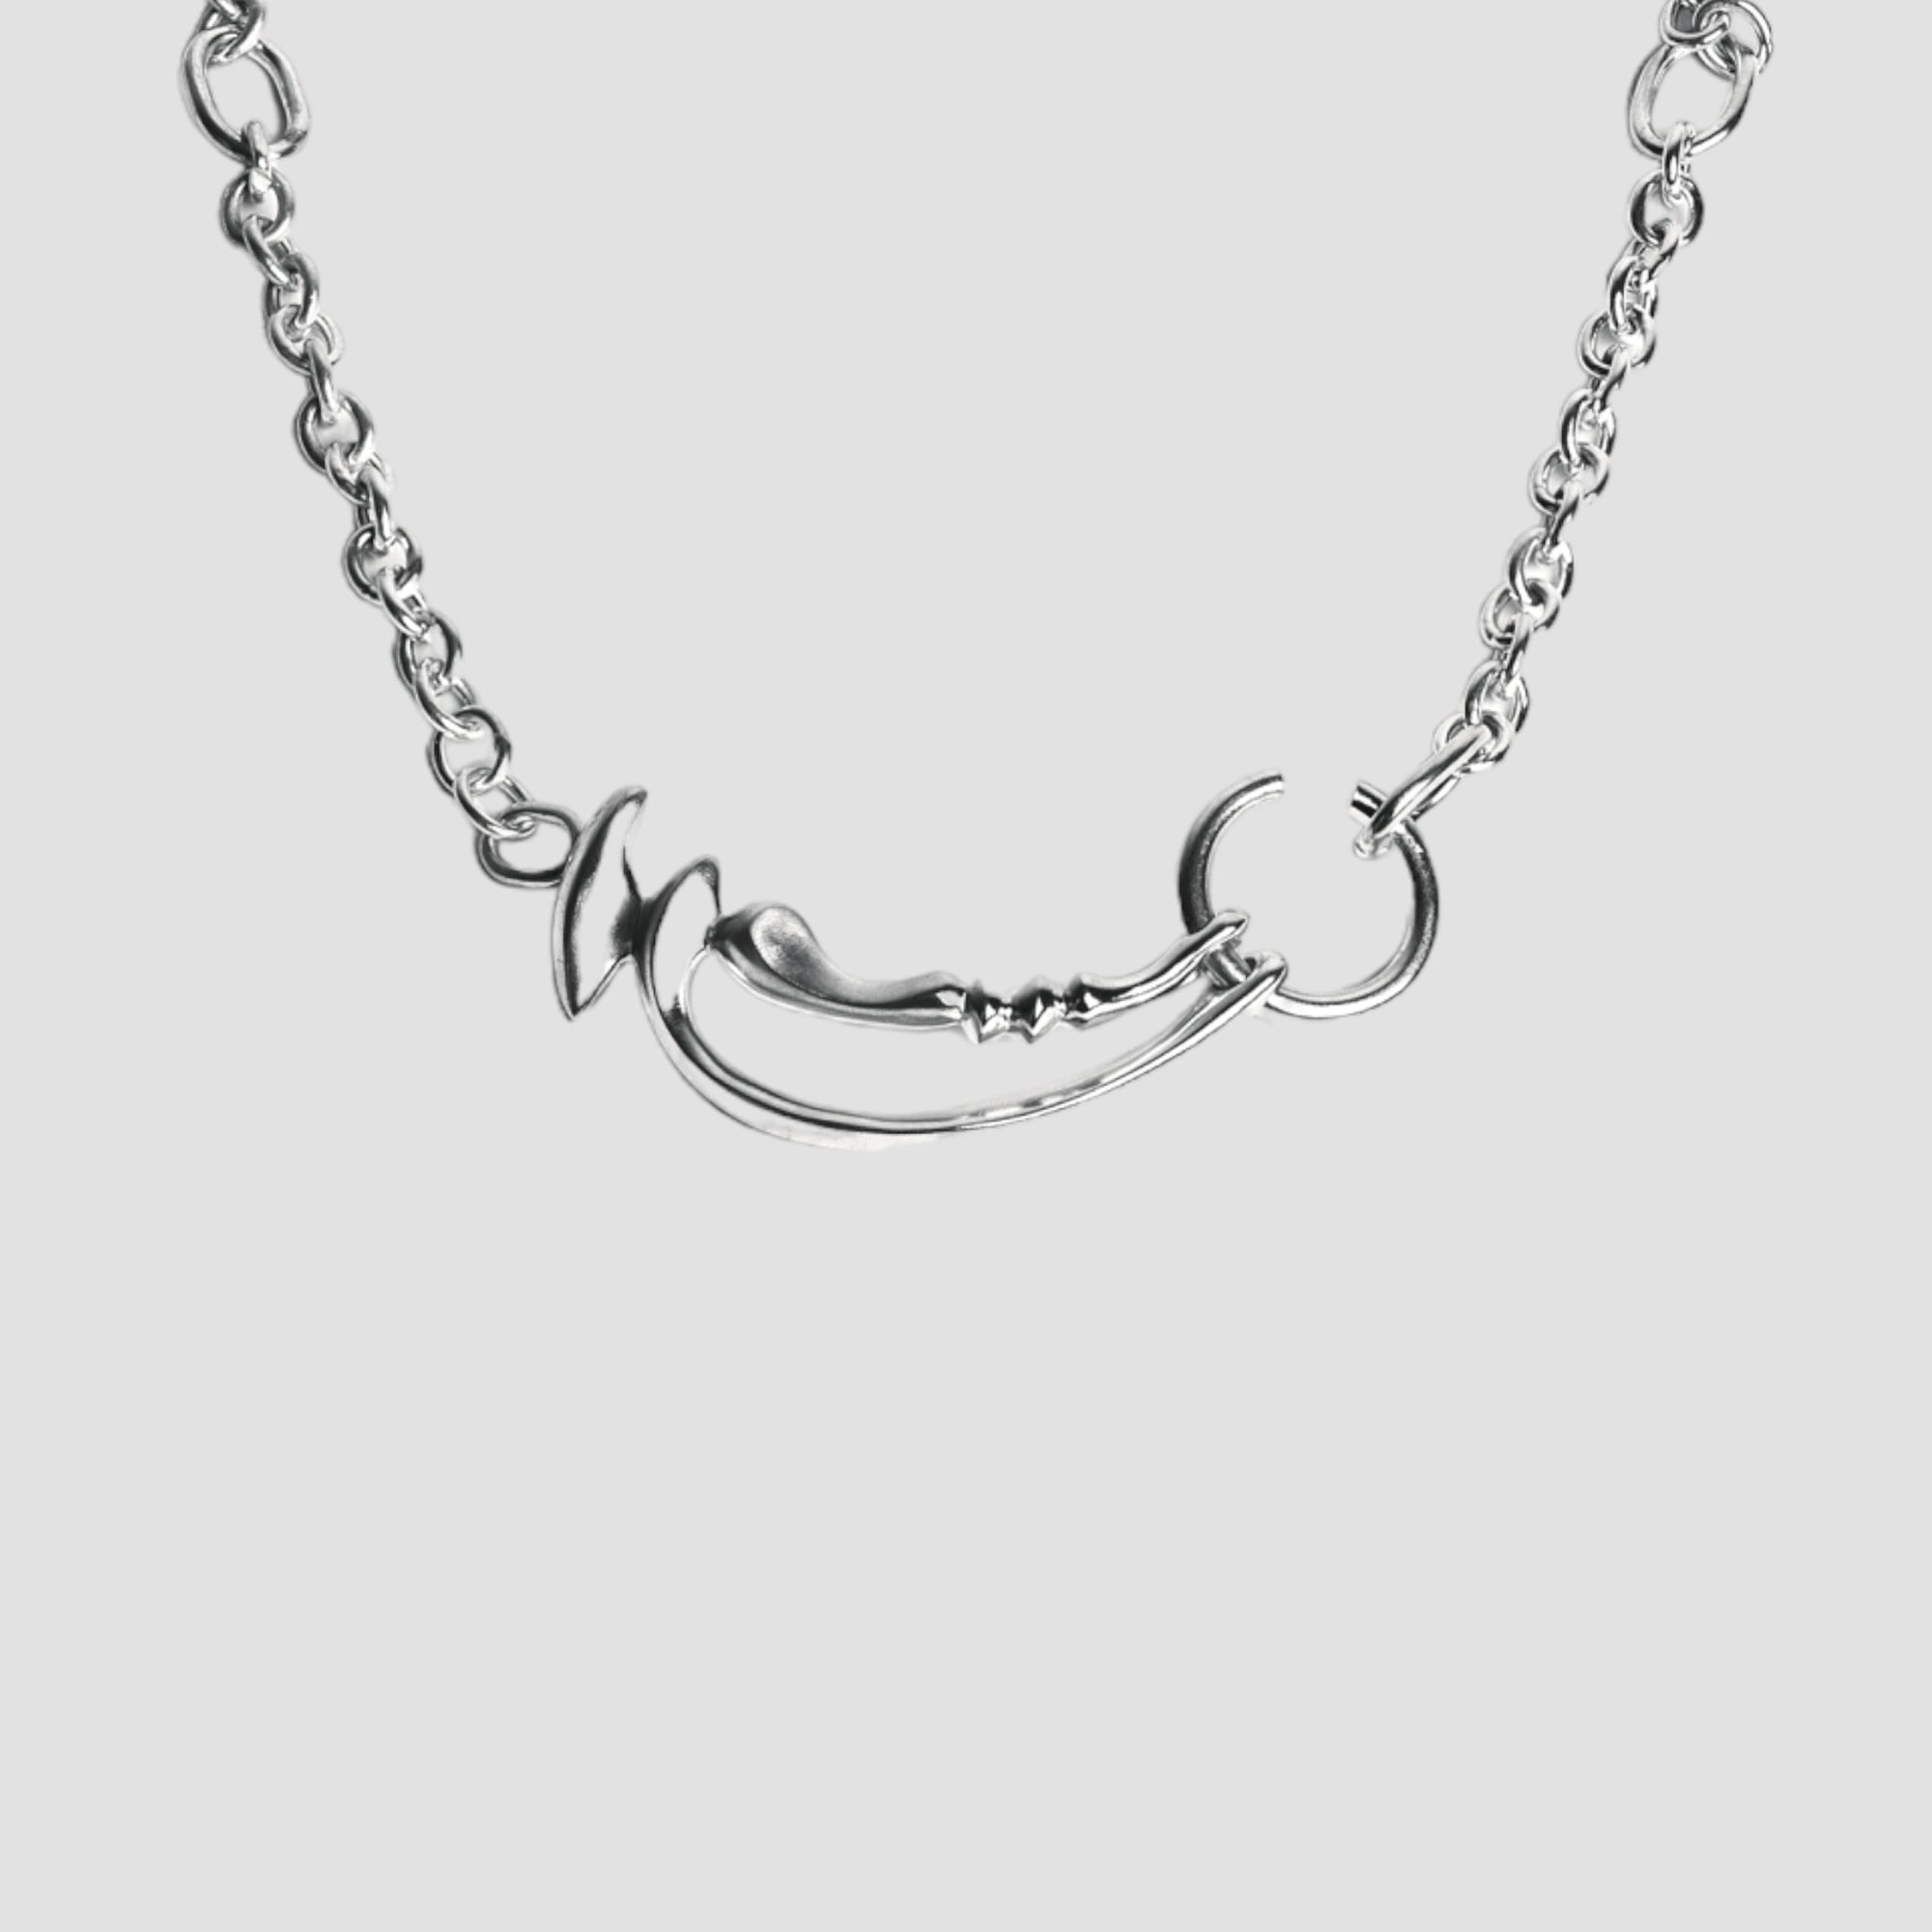 Impala Necklace - Handmade in 925 Silver